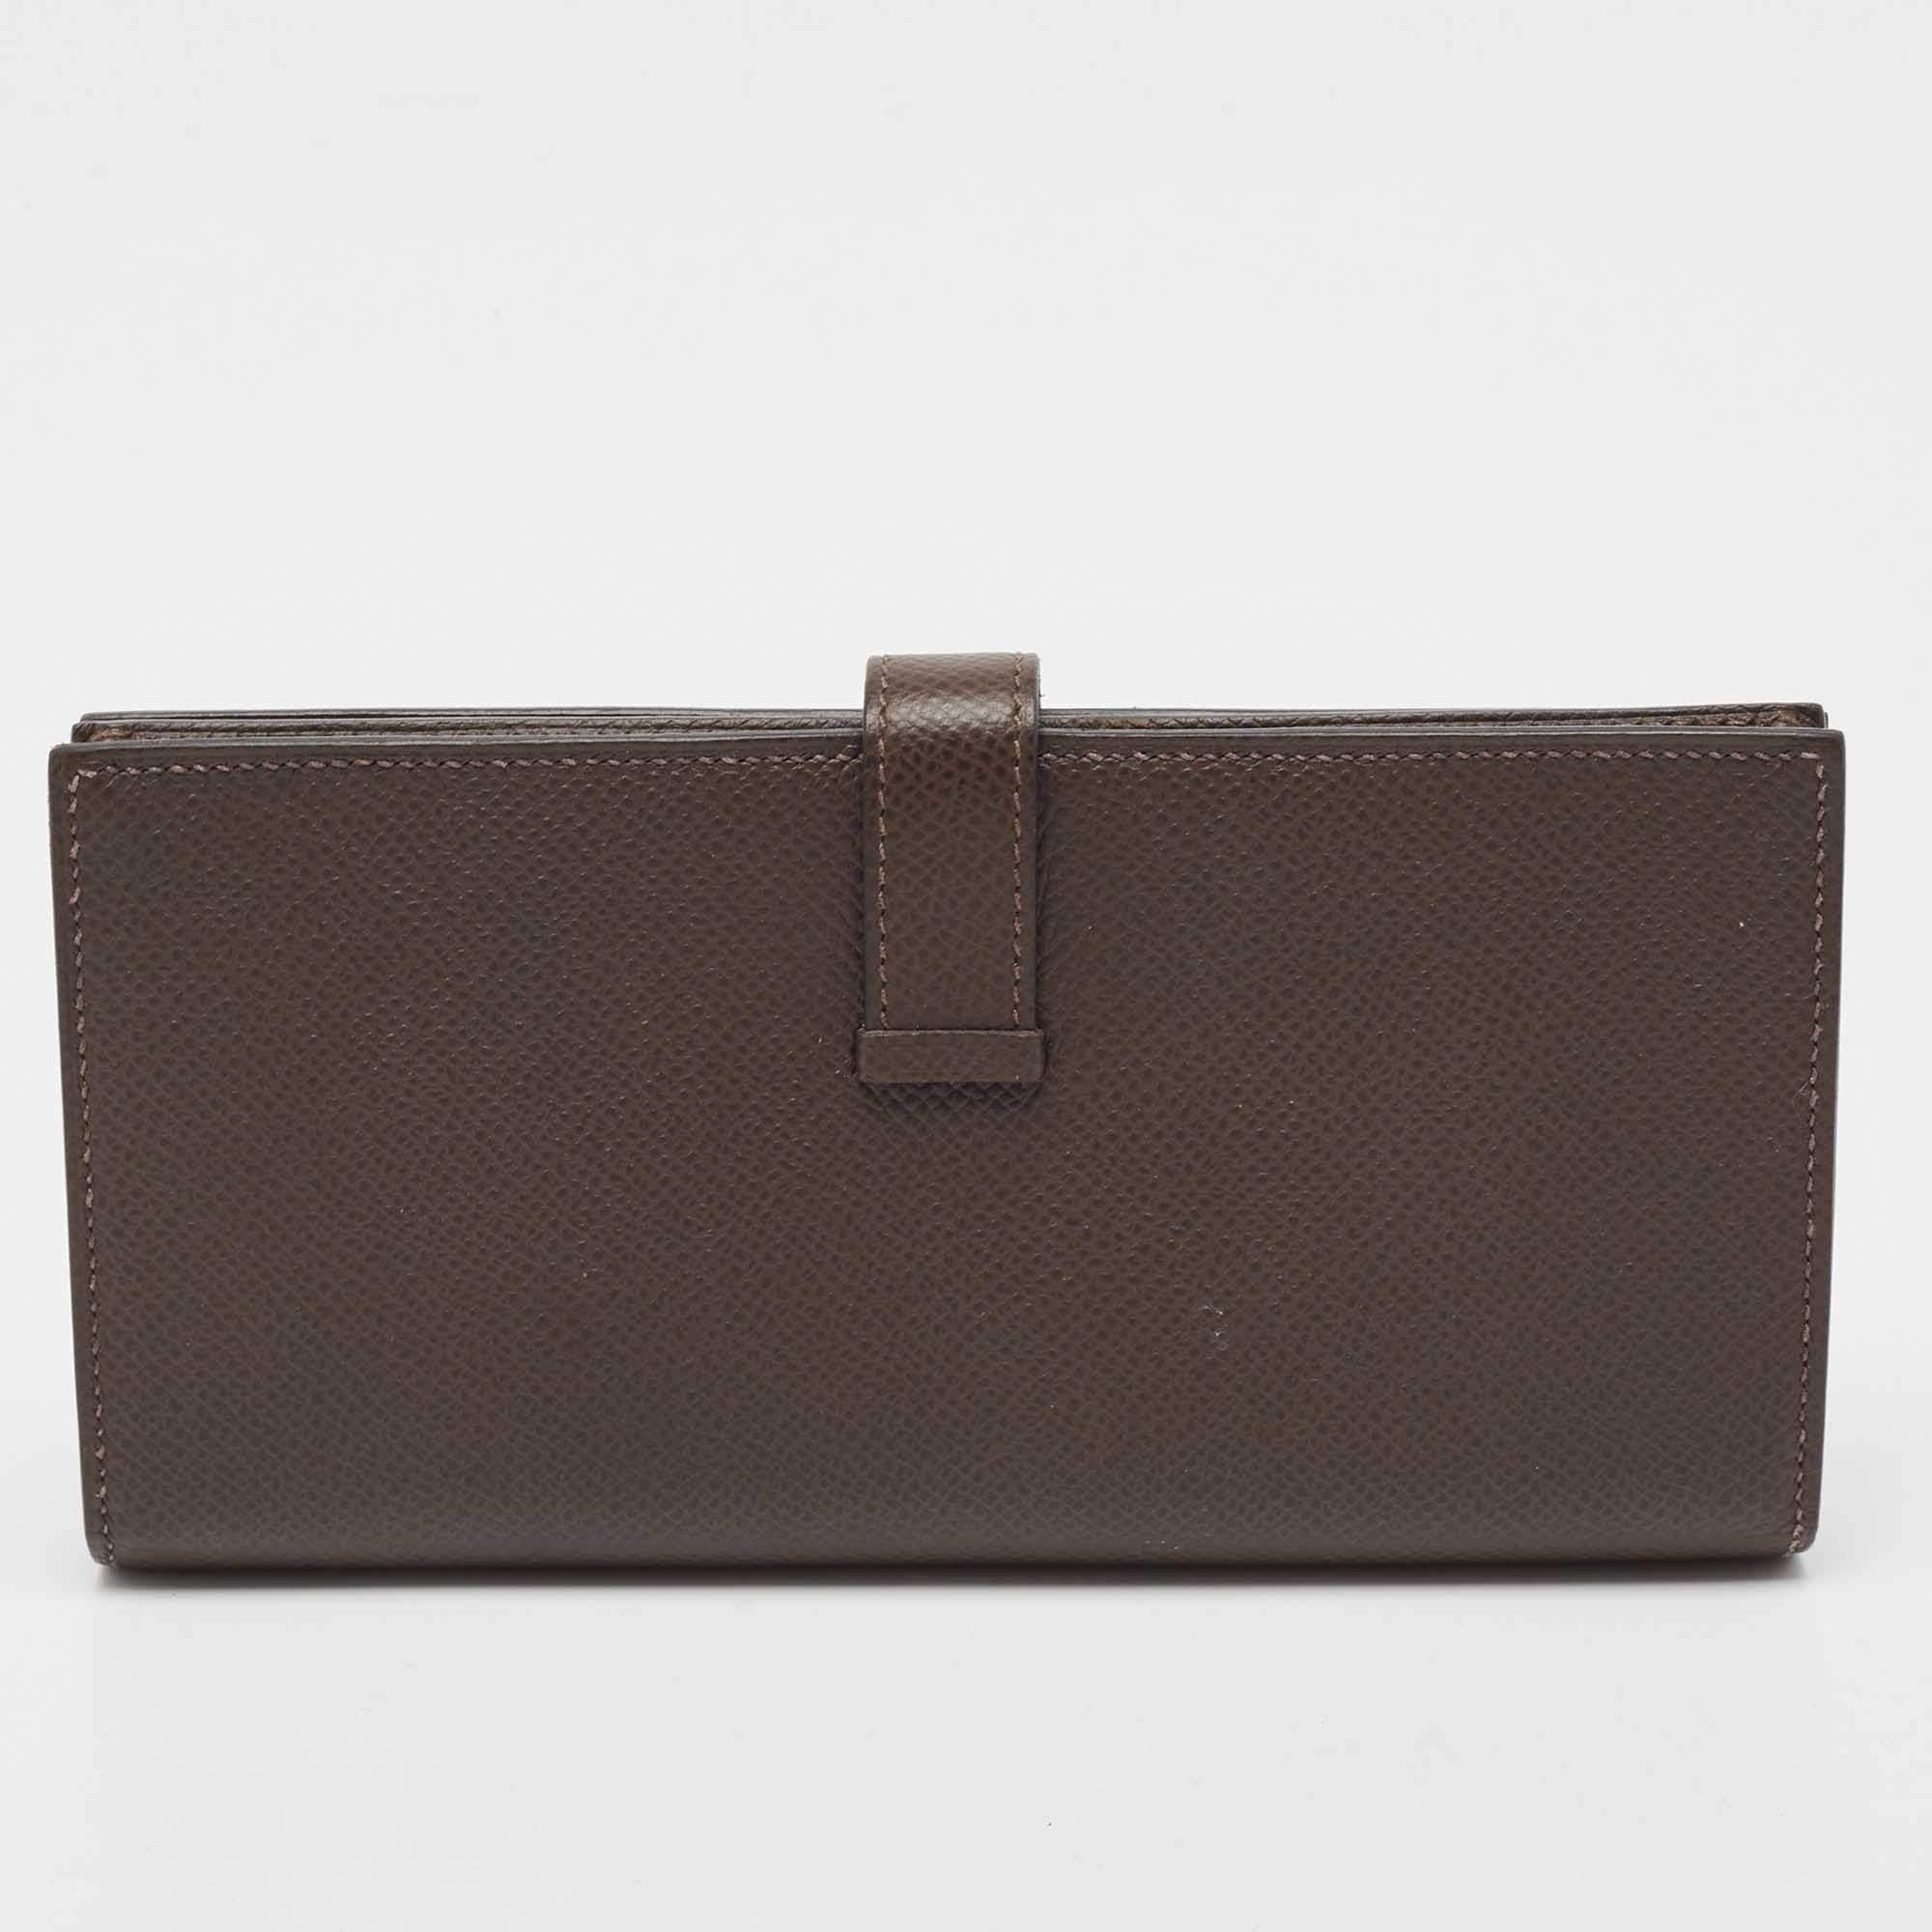 Luxuriously crafted by the House of Hermés, this stunning Bearn Gusset wallet is a must-have accessory for luxury fashion lovers. This wallet carries an elegant appeal and a sleek silhouette. It is great for everyday use.

